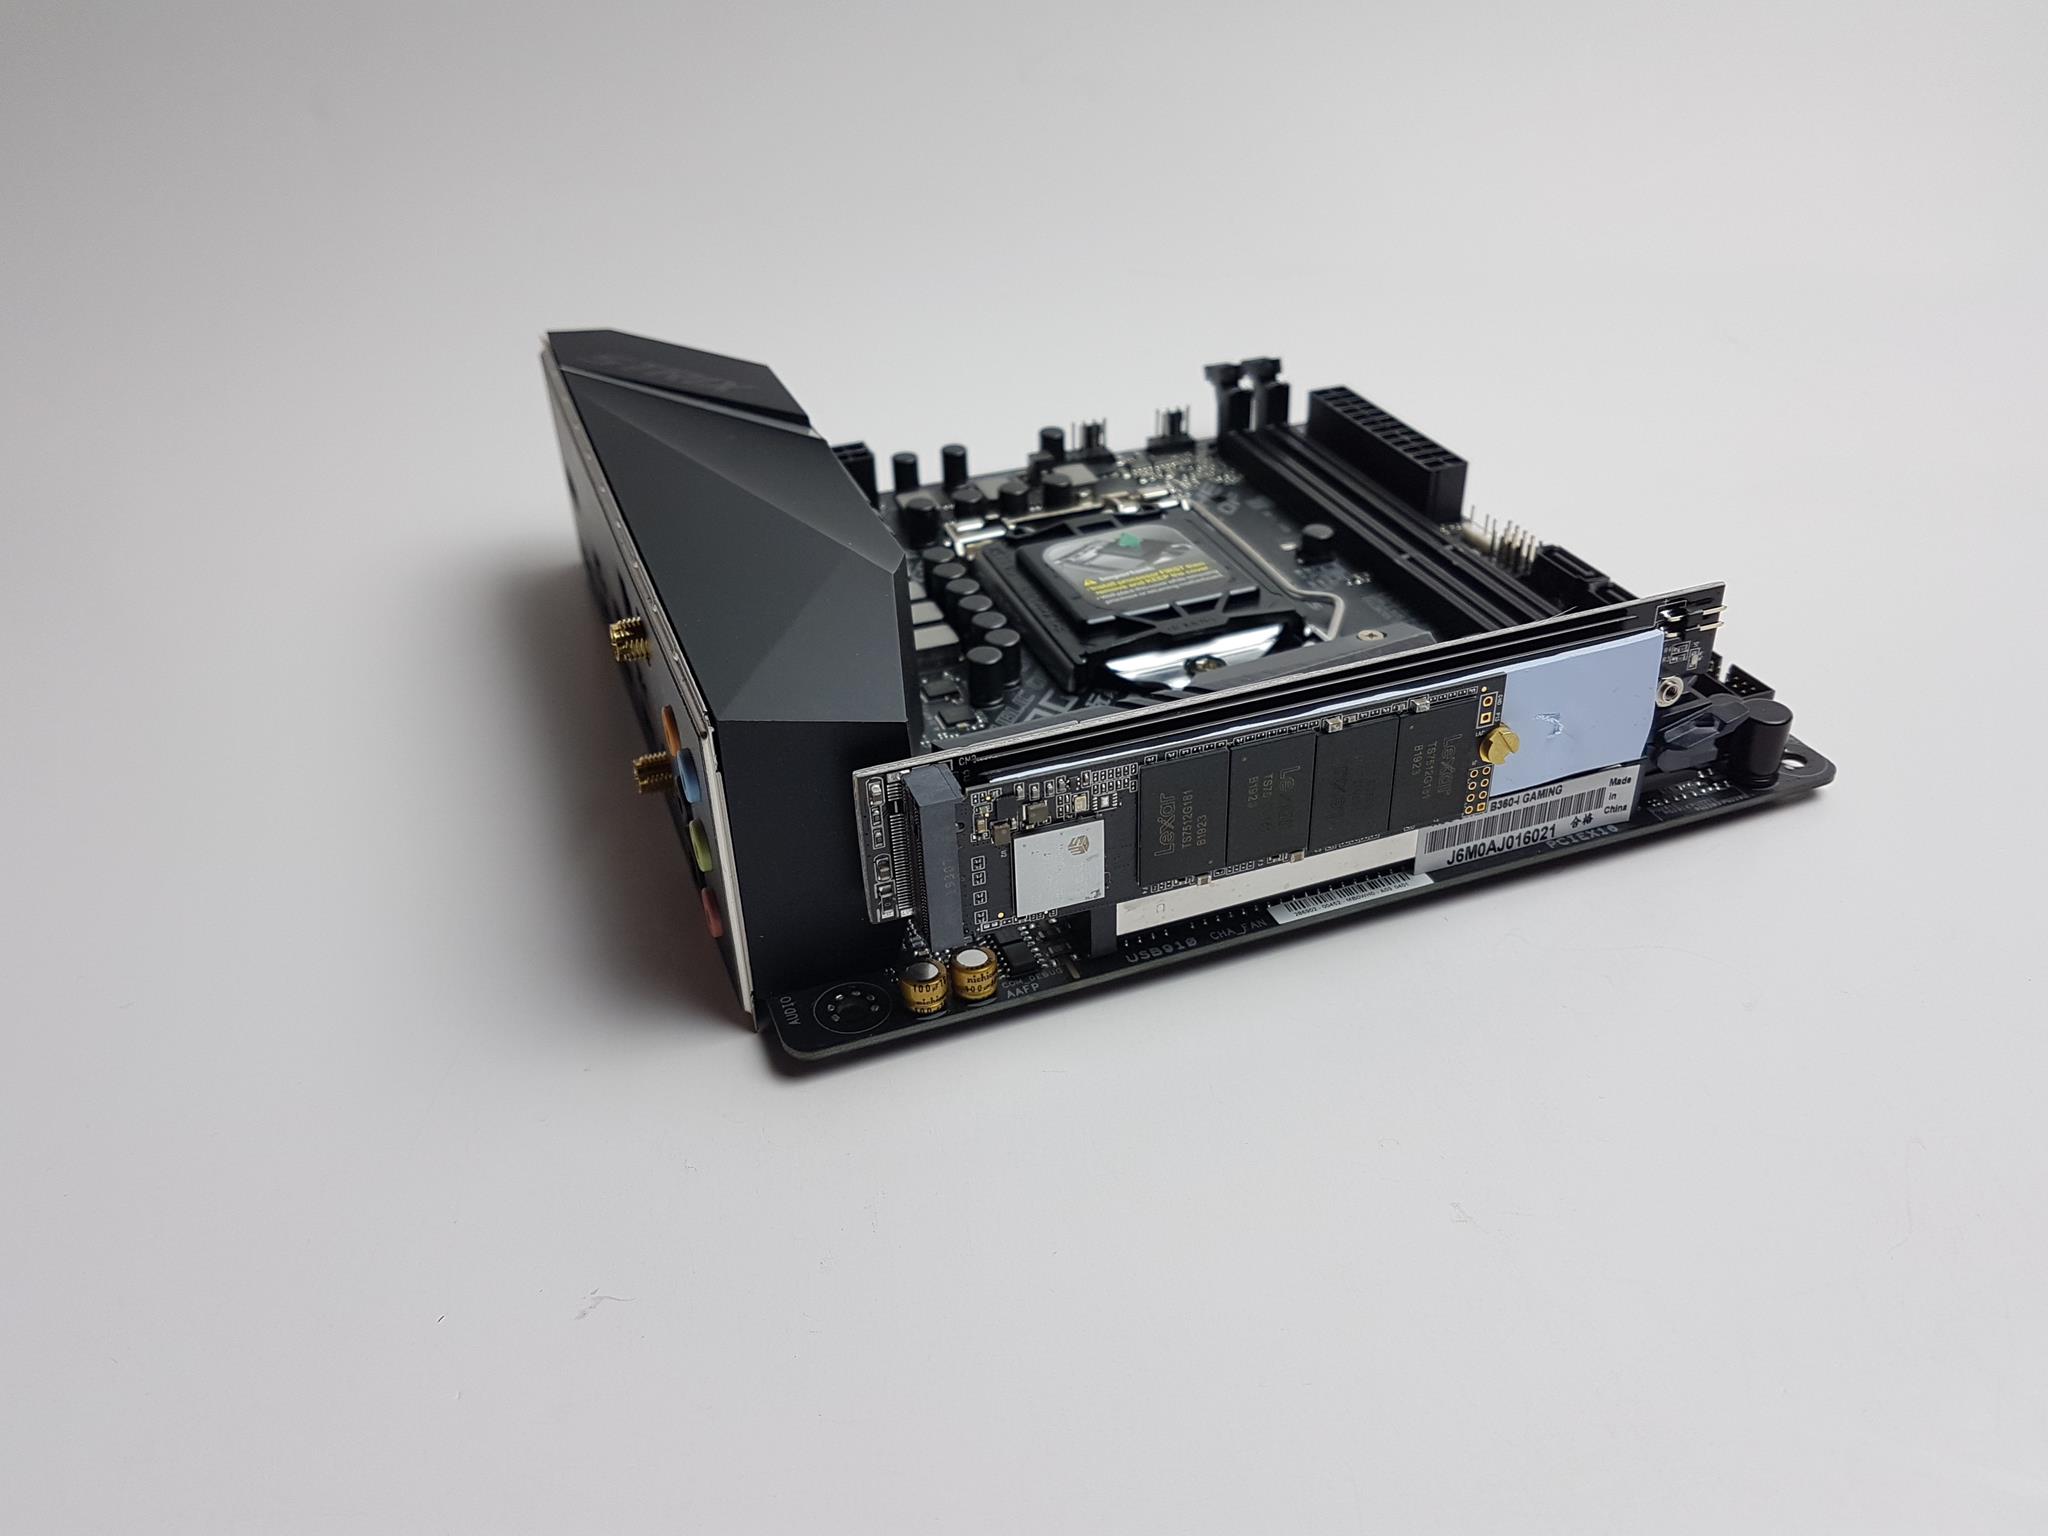 SilverStone SST-ECM26 PCIe X4 Adapter for M.2 SSD Review